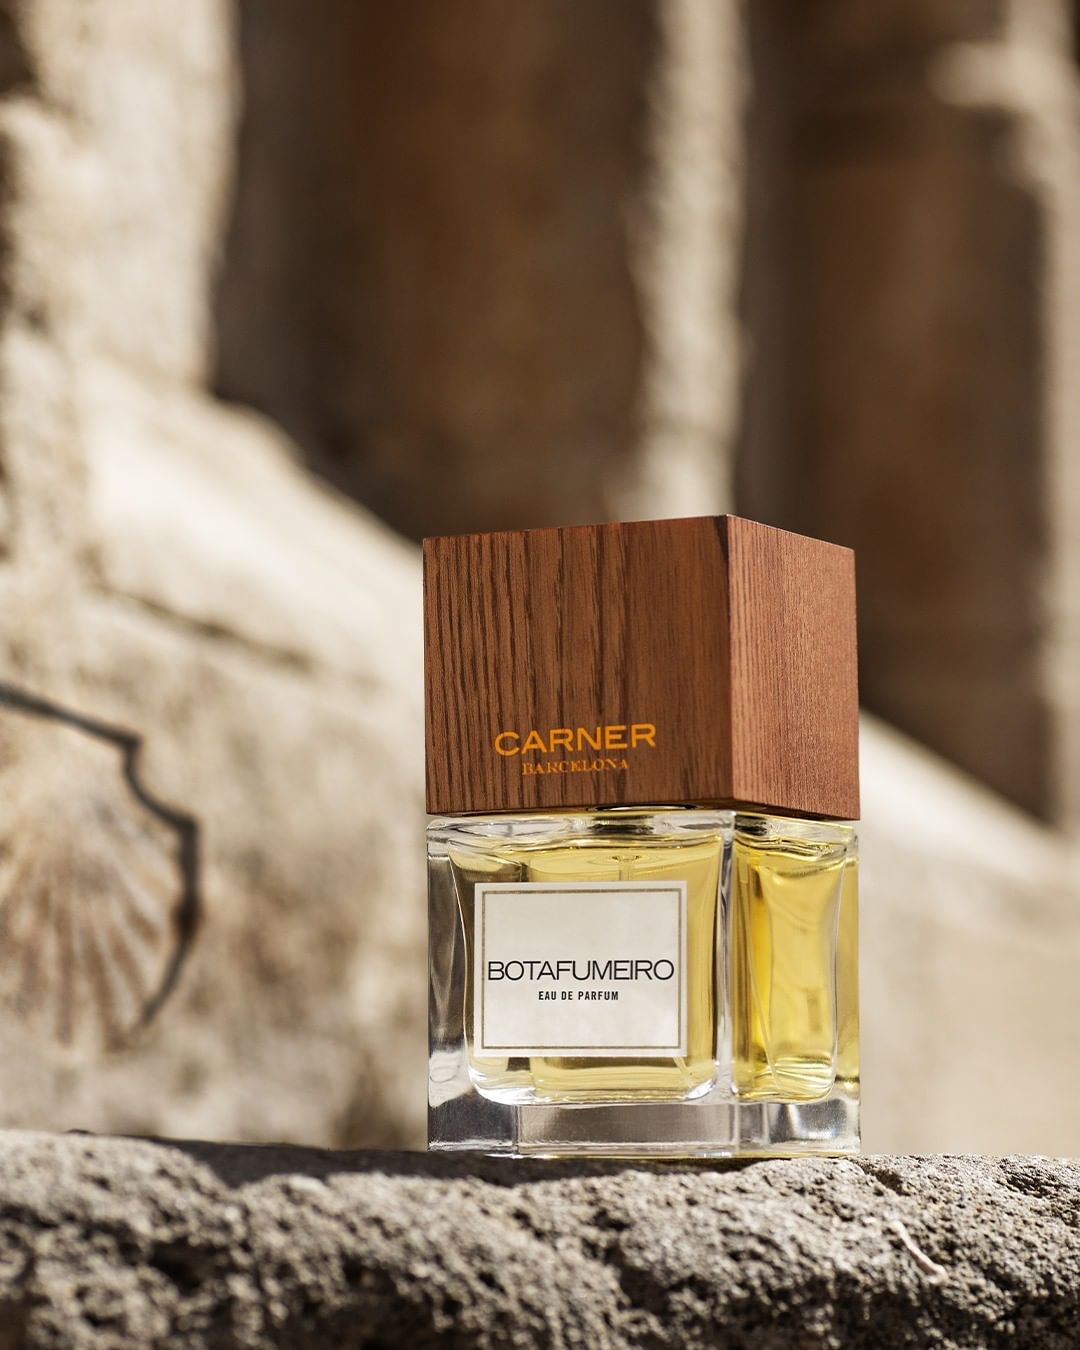 CARNER BARCELONA • Perfumes - Botafumeiro; rings of biblical times when pilgrims traveled on foot along the pastoral Camino de Santiago in route to the tomb of St. James resting below the historic sto...